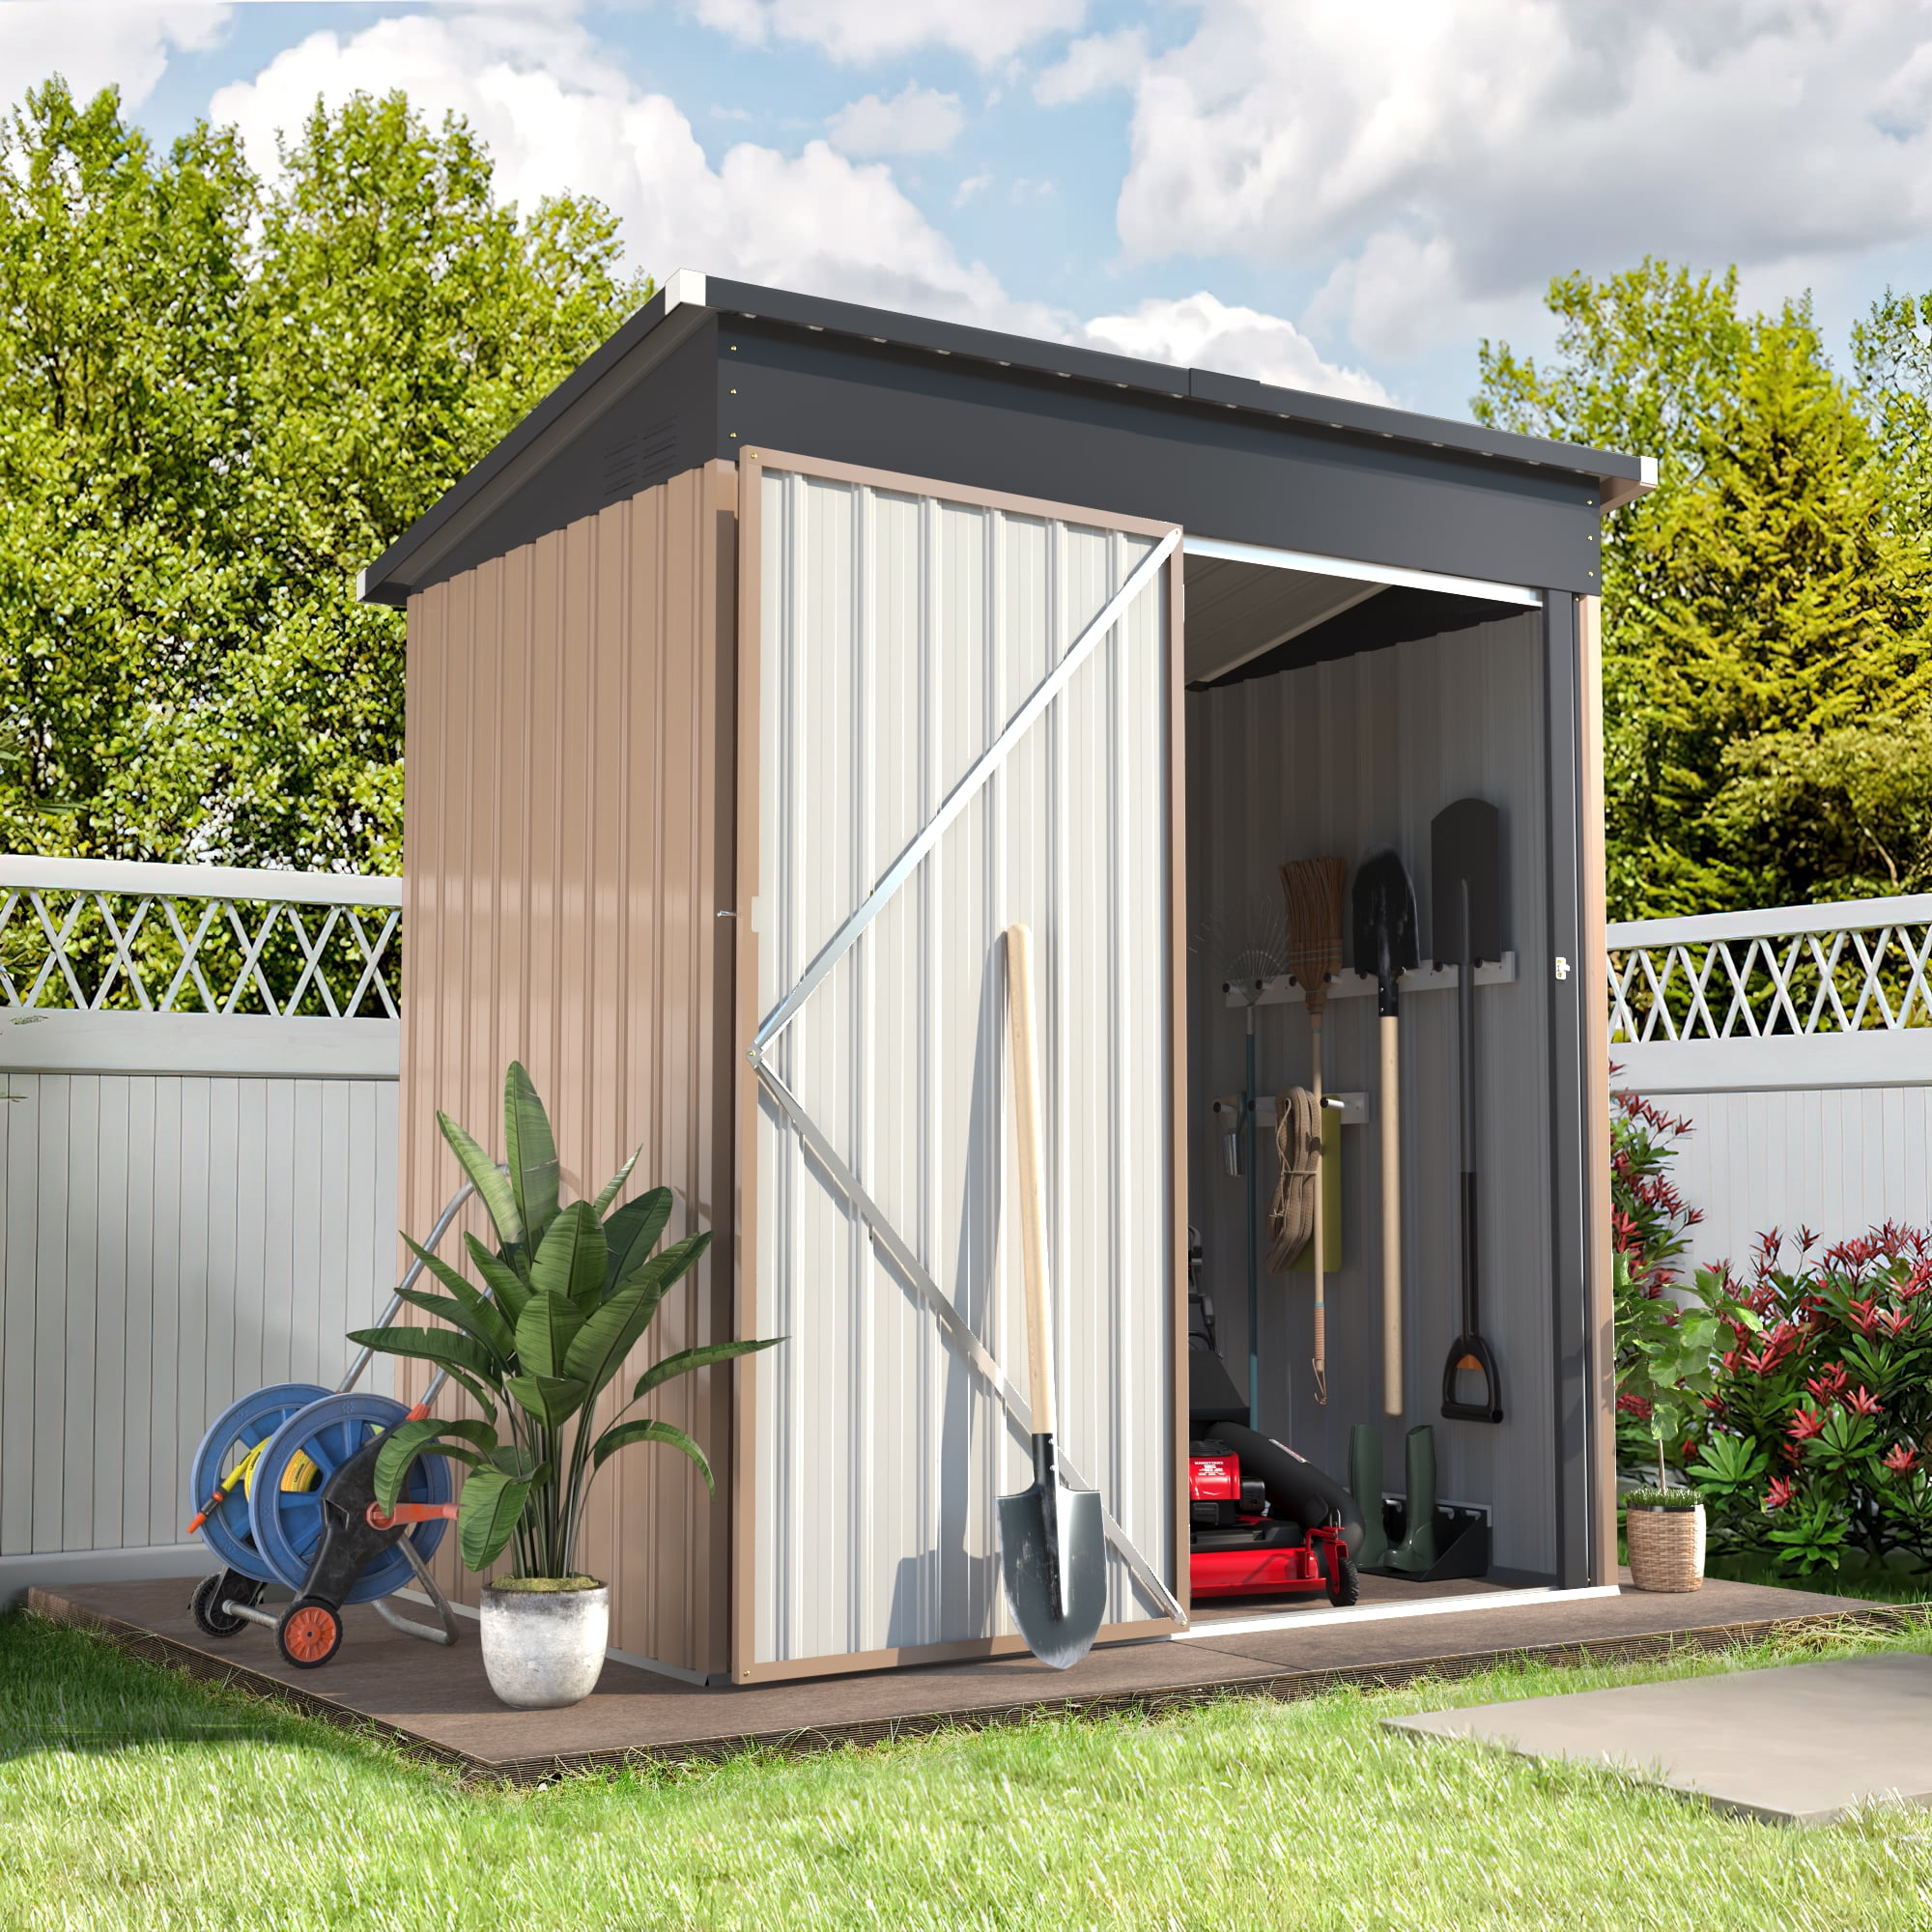 YODOLLA 5 x 3 ft. Outdoor Metal Steel Storage Shed with Sliding Roof & Lockable Door for Backyard, Garden $99 + $30 shipping